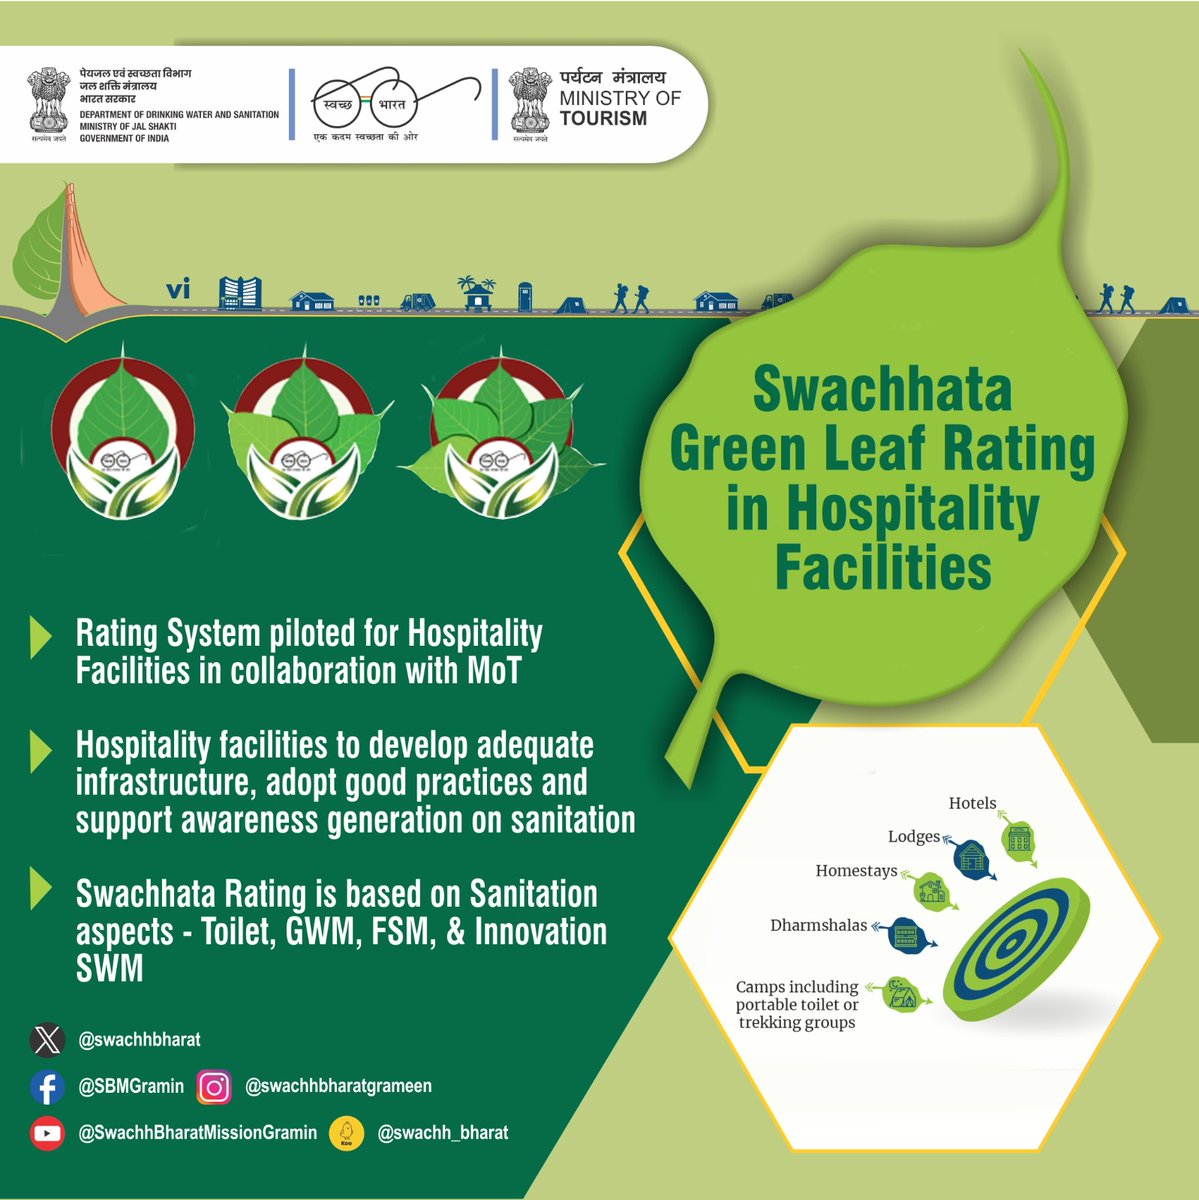 DDWS in collaboration with the Ministry of Tourism rolled out a ‘Swachhata Green Leaf Rating System’ 🍃 for all the hospitality facilities in the country. It will encourage hospitality owners to adopt better technologies for sanitation to make their facilities SGLR-compliant